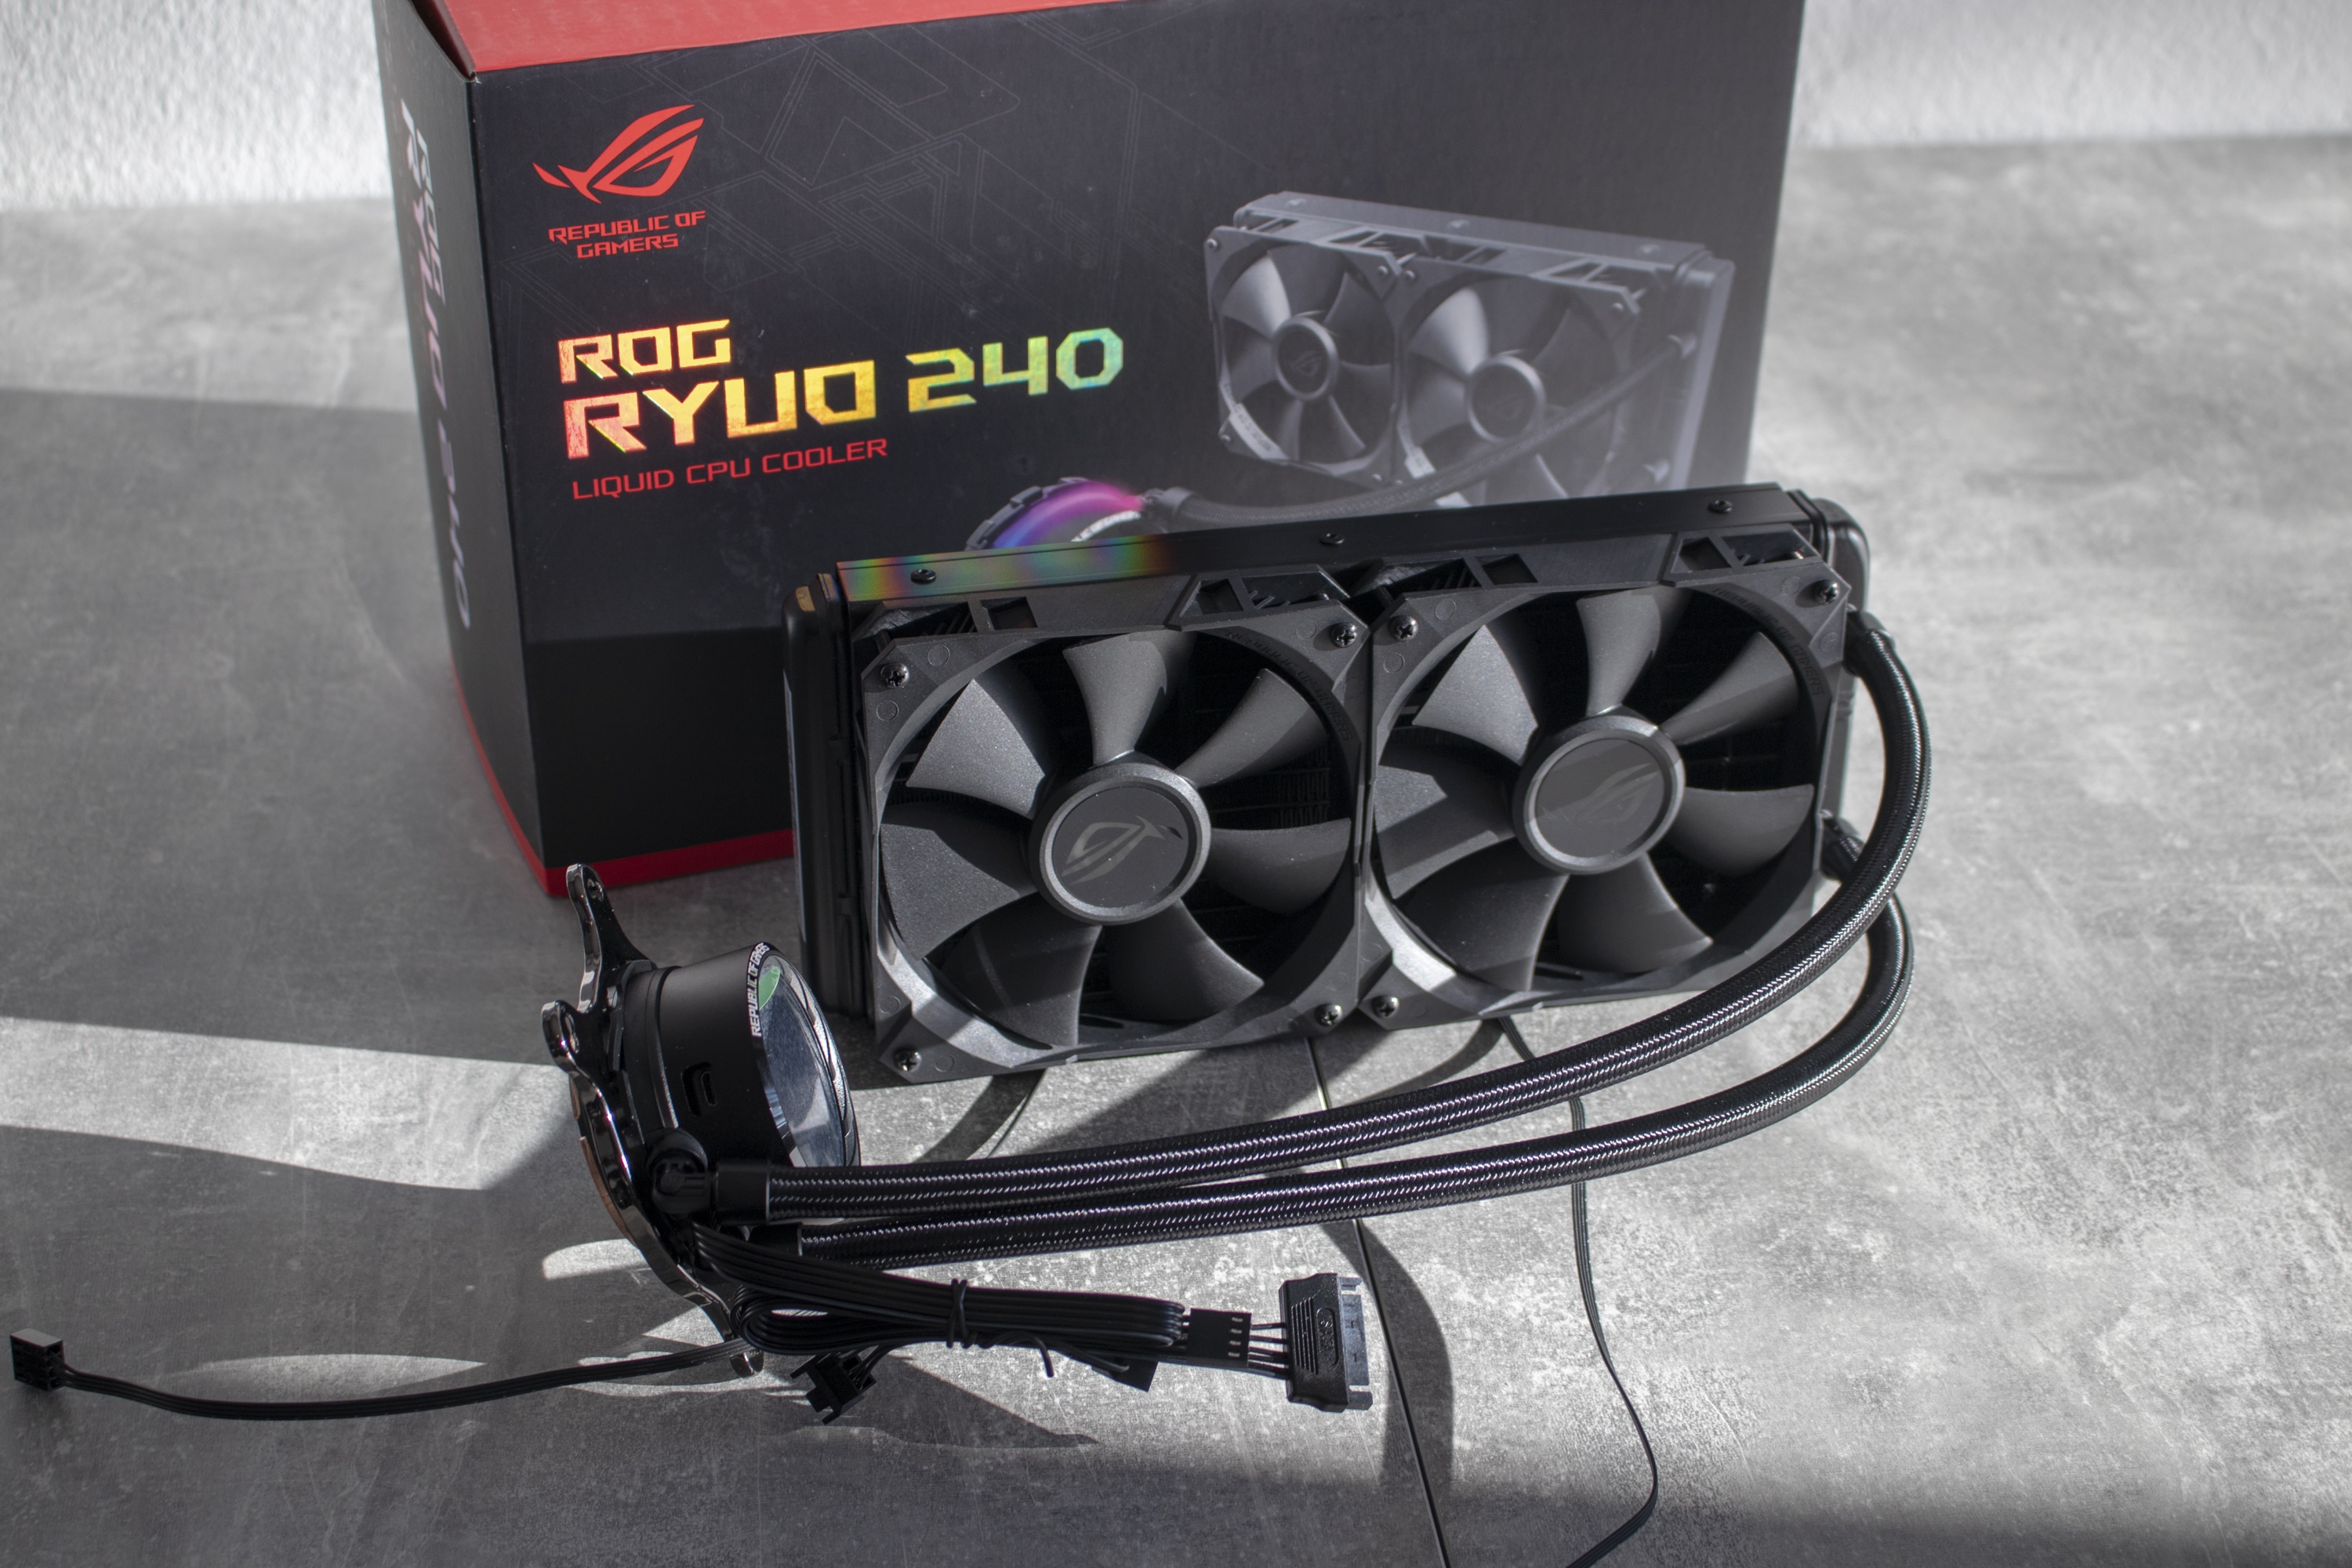 fly Instruere fyrretræ ASUS ROG RYUO 240 Review: Complete Water Cooling with OLED Display